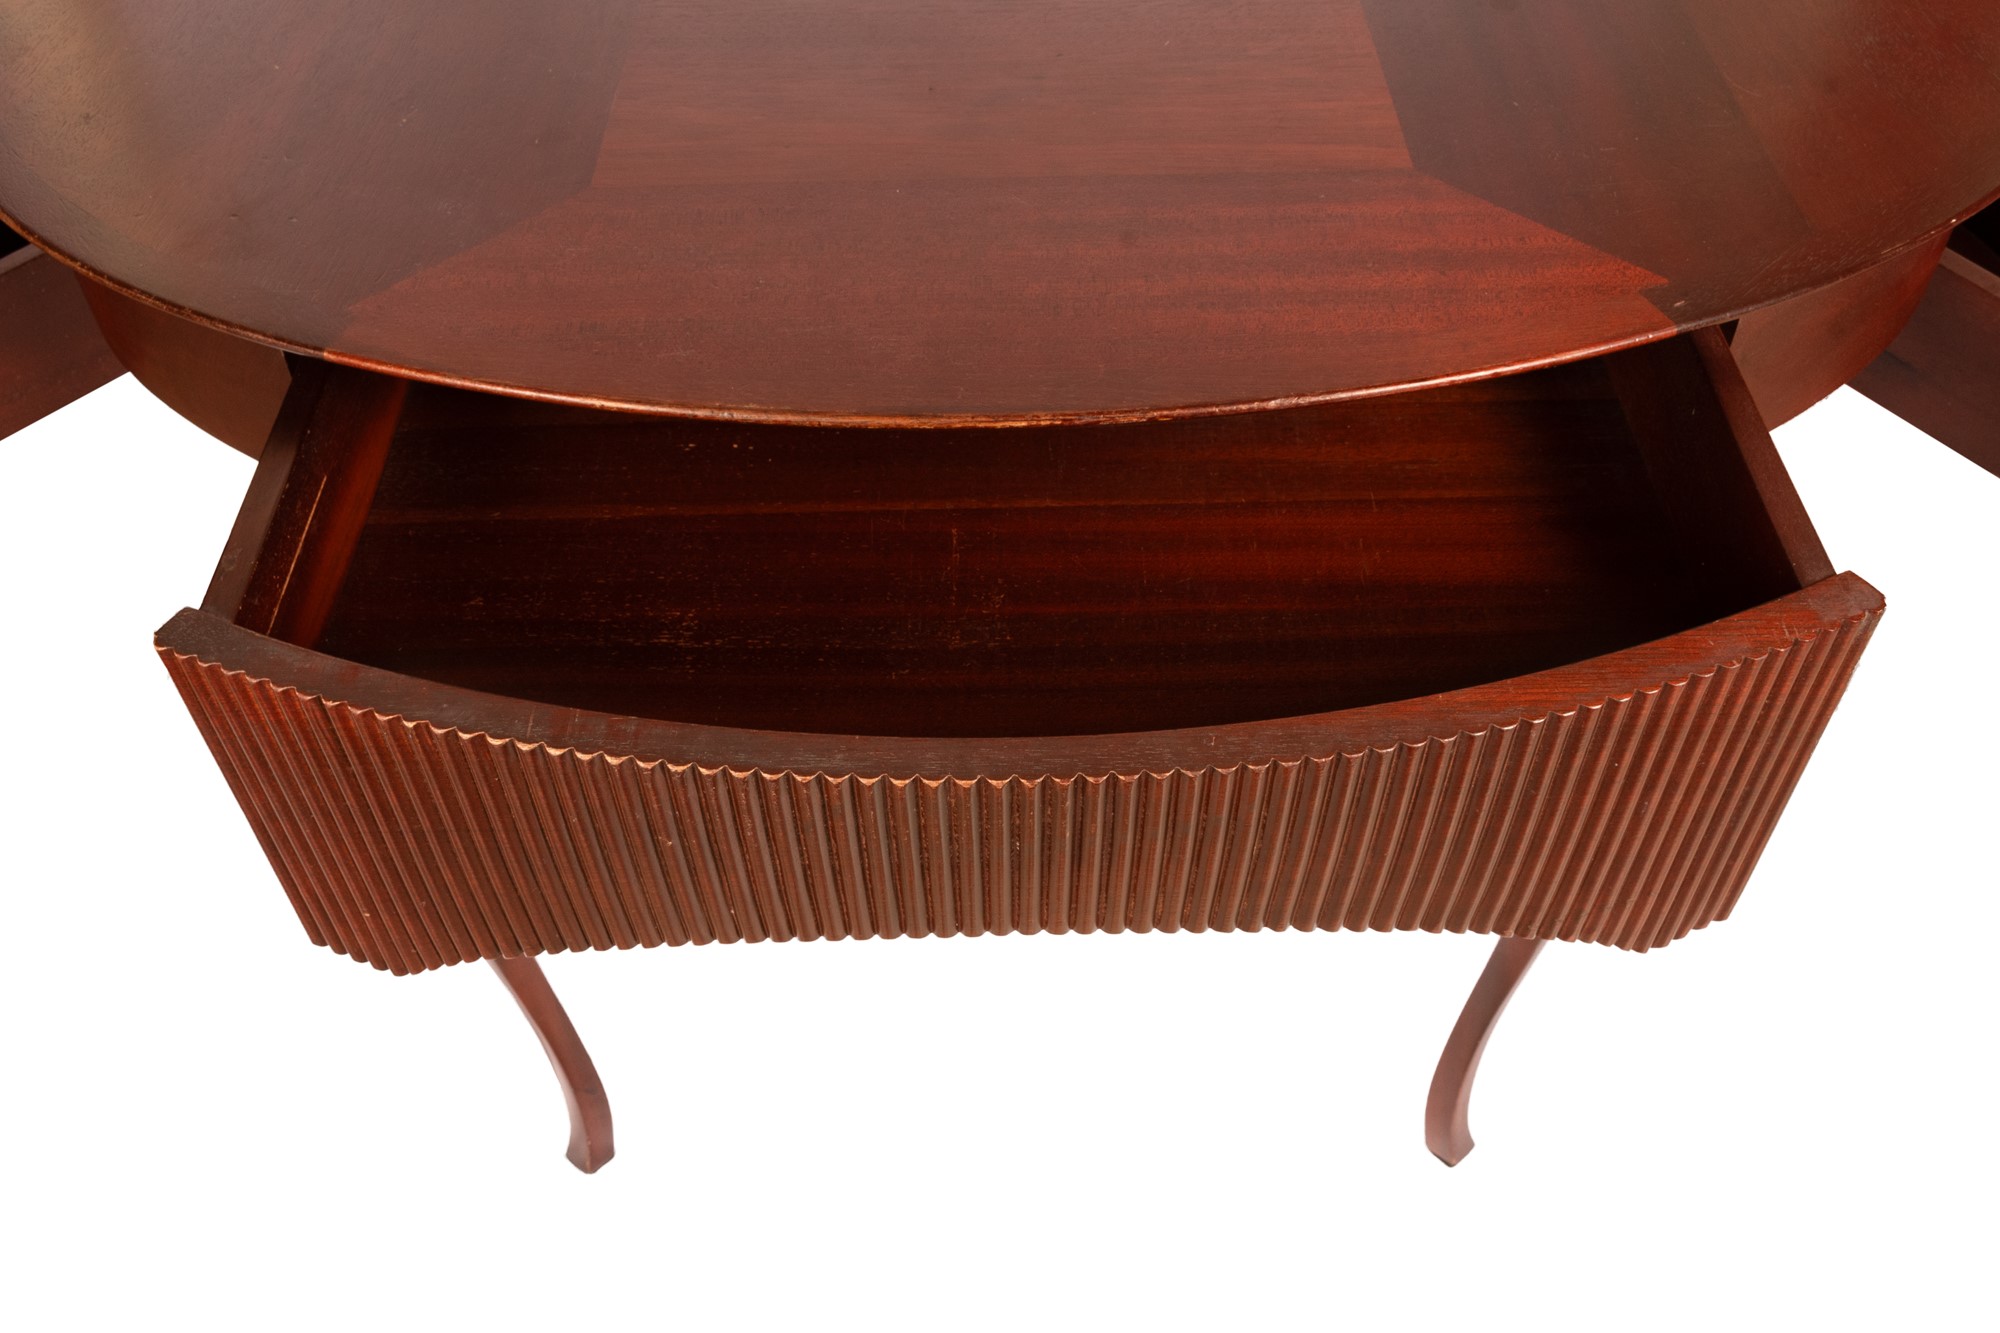 Writing desk in cherry wood - Image 19 of 25